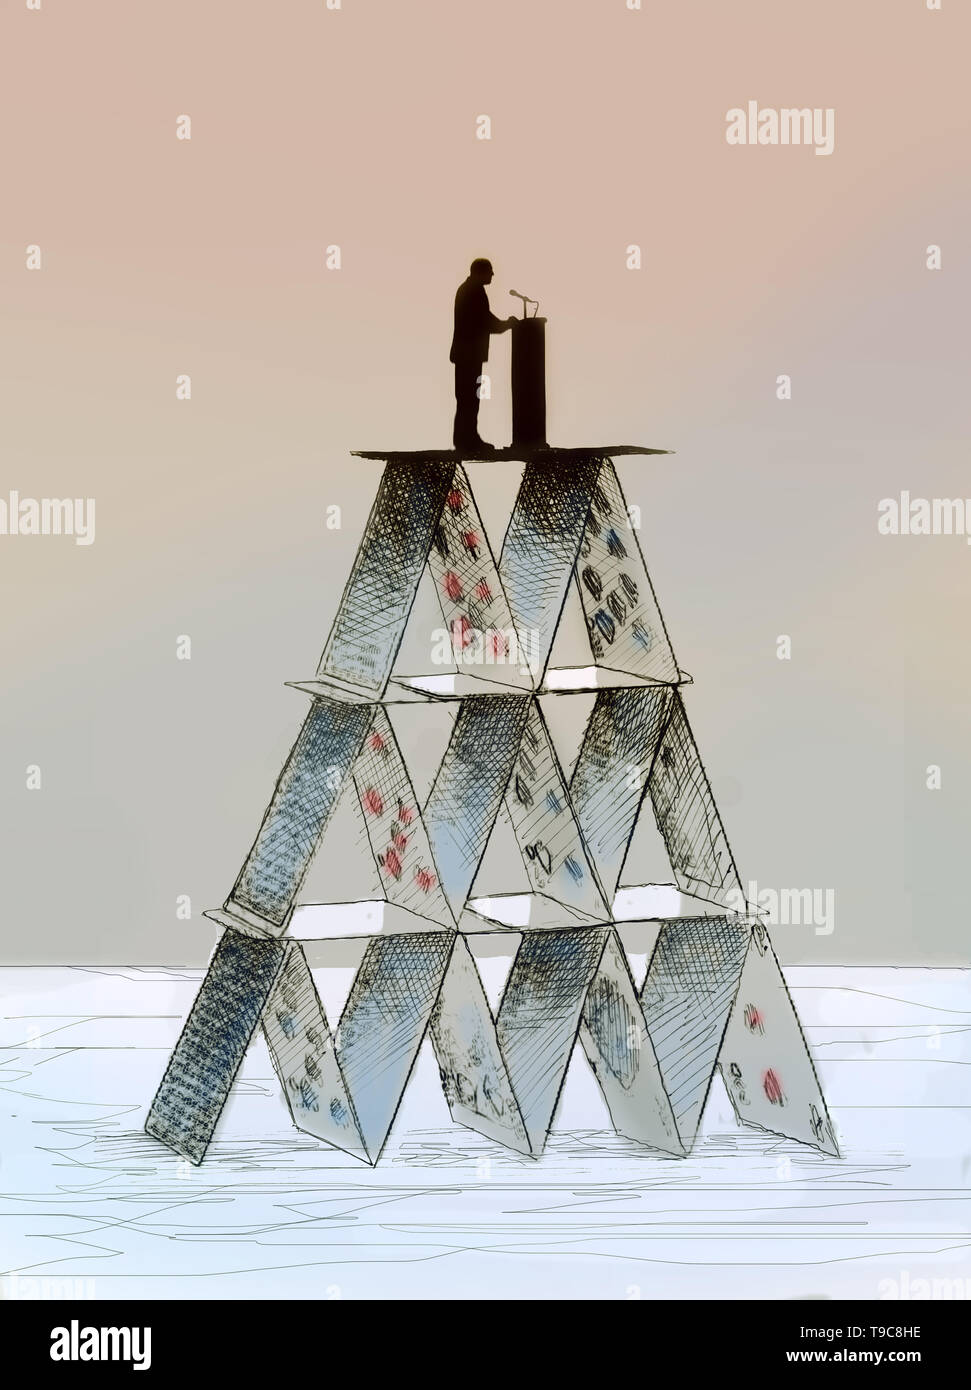 concept image of a man standing on a podium on a house of cards talking into microphone depicting insecurity and precarity. Stock Photo